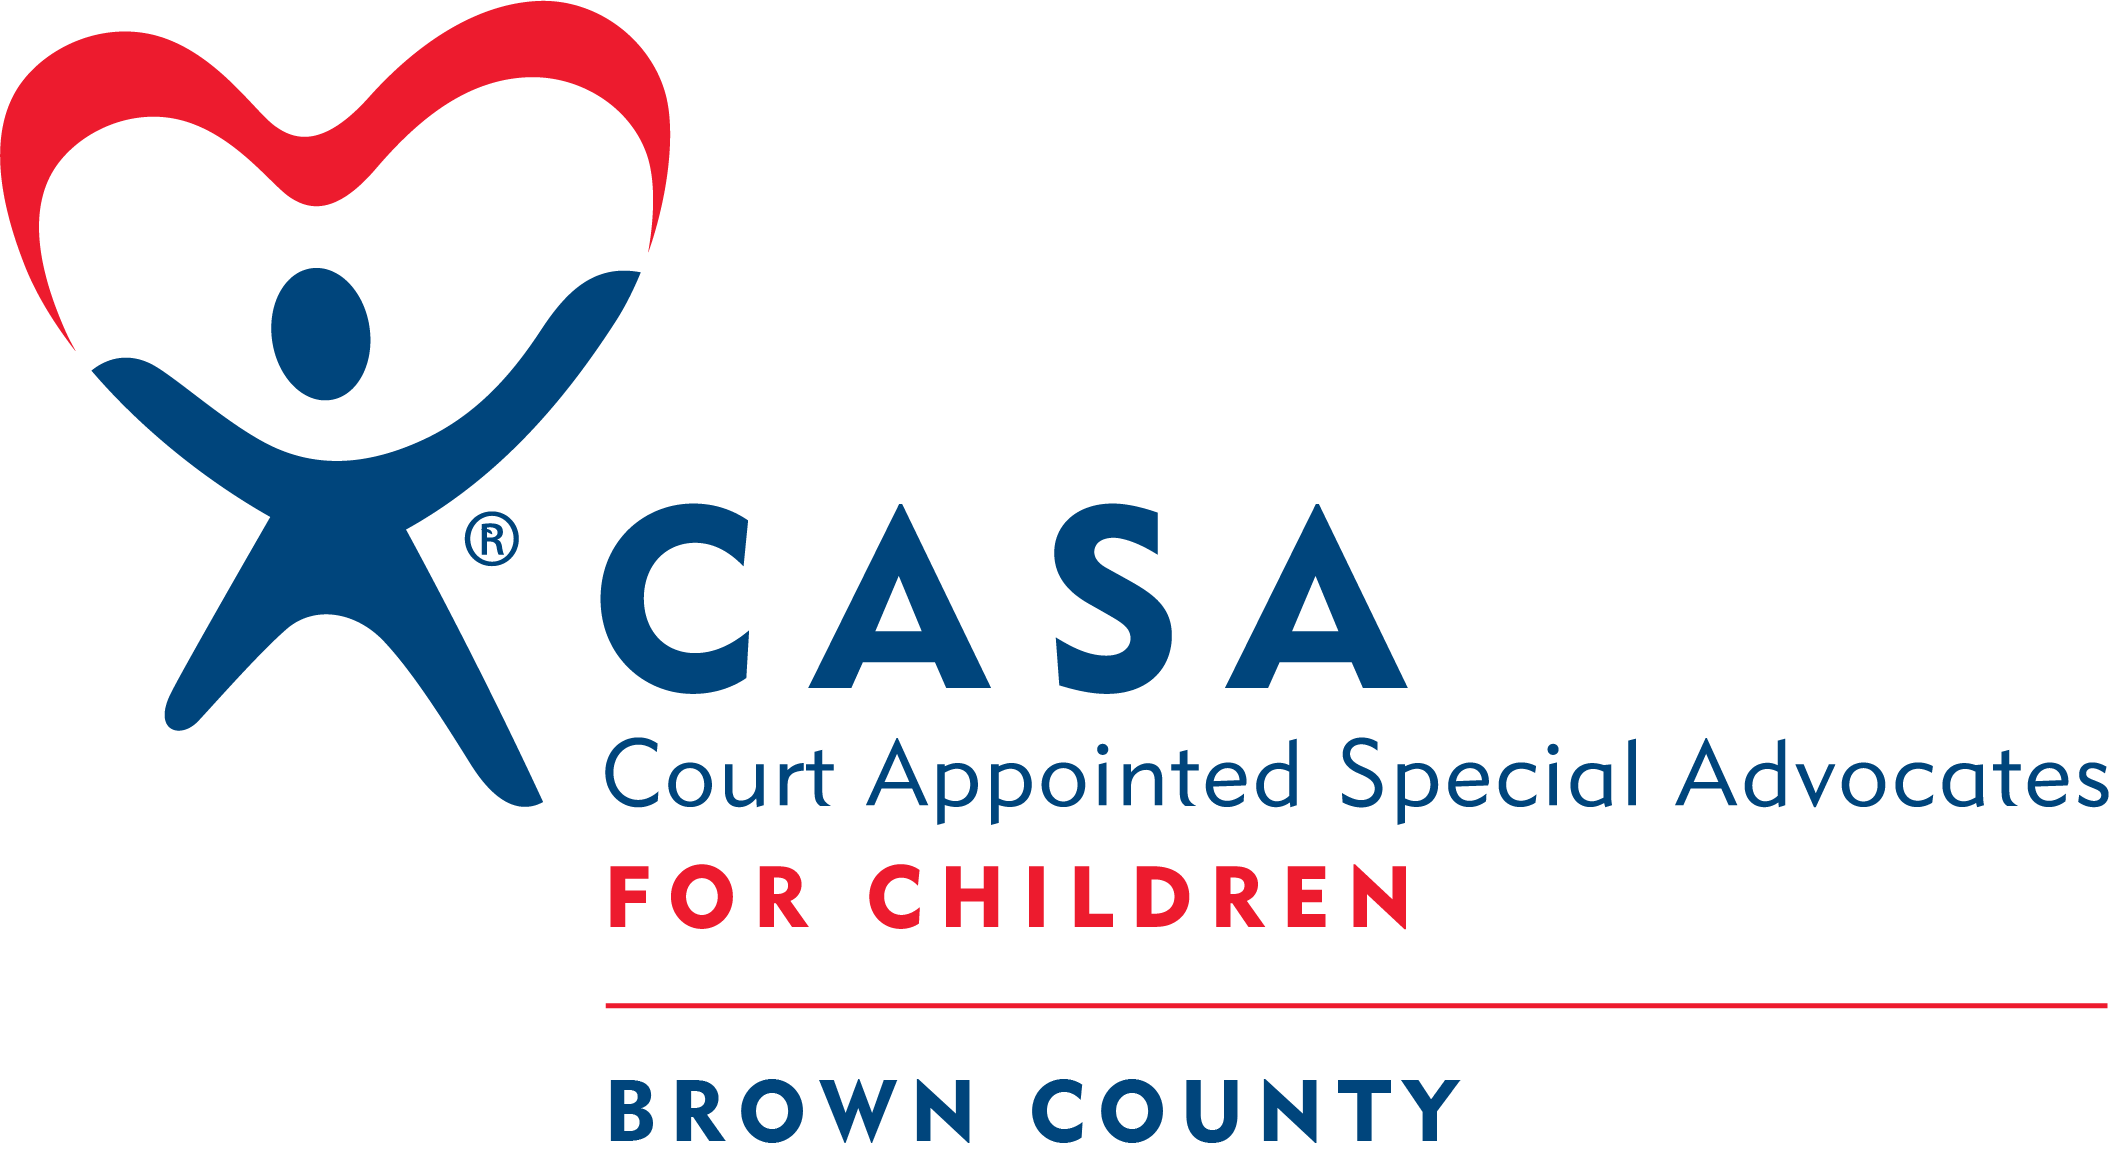 Court Appointed Special Advocates for Childen Brown County logo